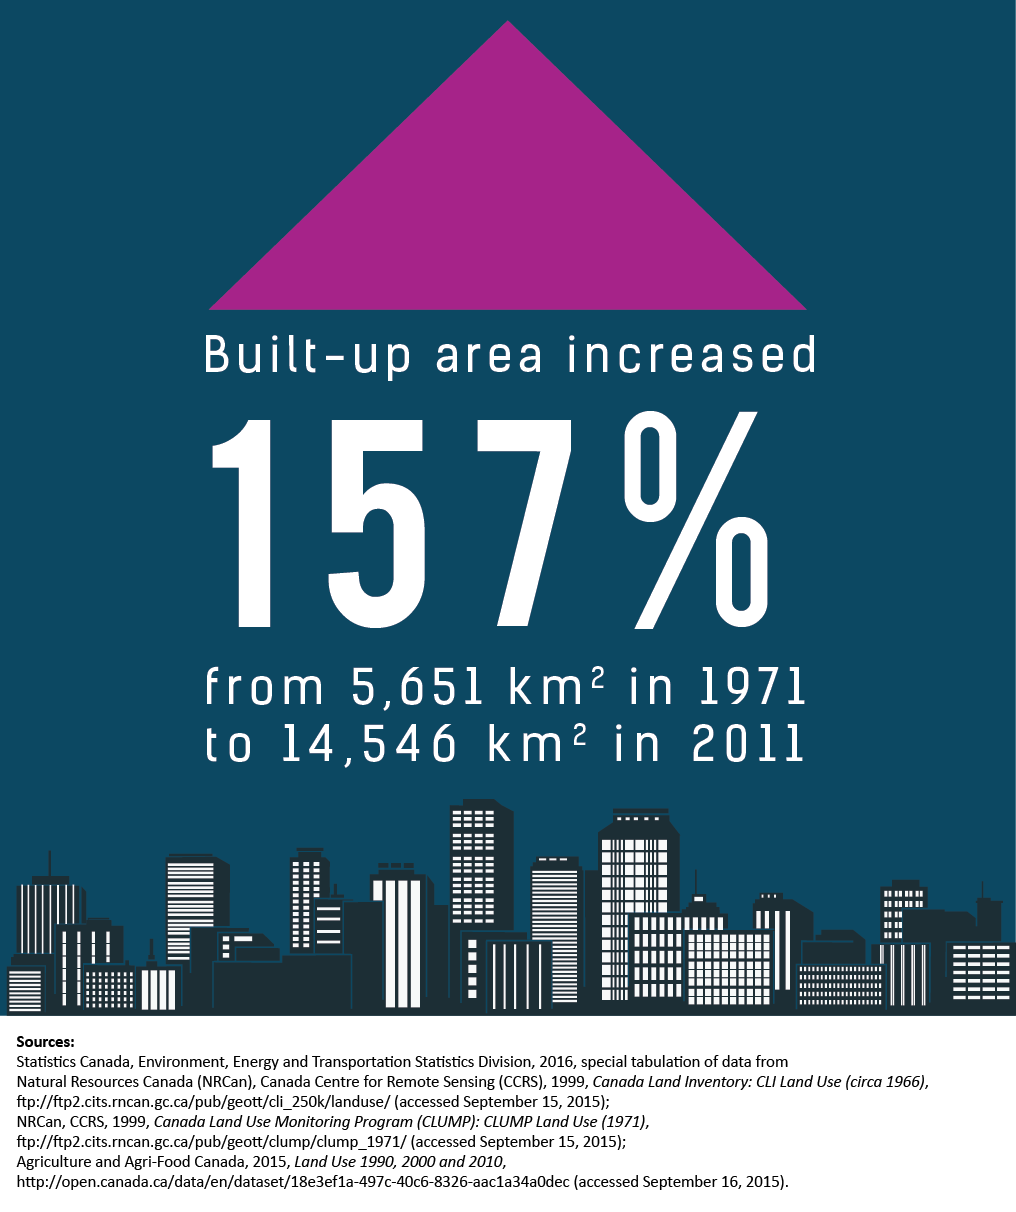 Thumbnail for Infographic 1: Built-up area growth, census metropolitan areas of Canada, 1971 to 2011